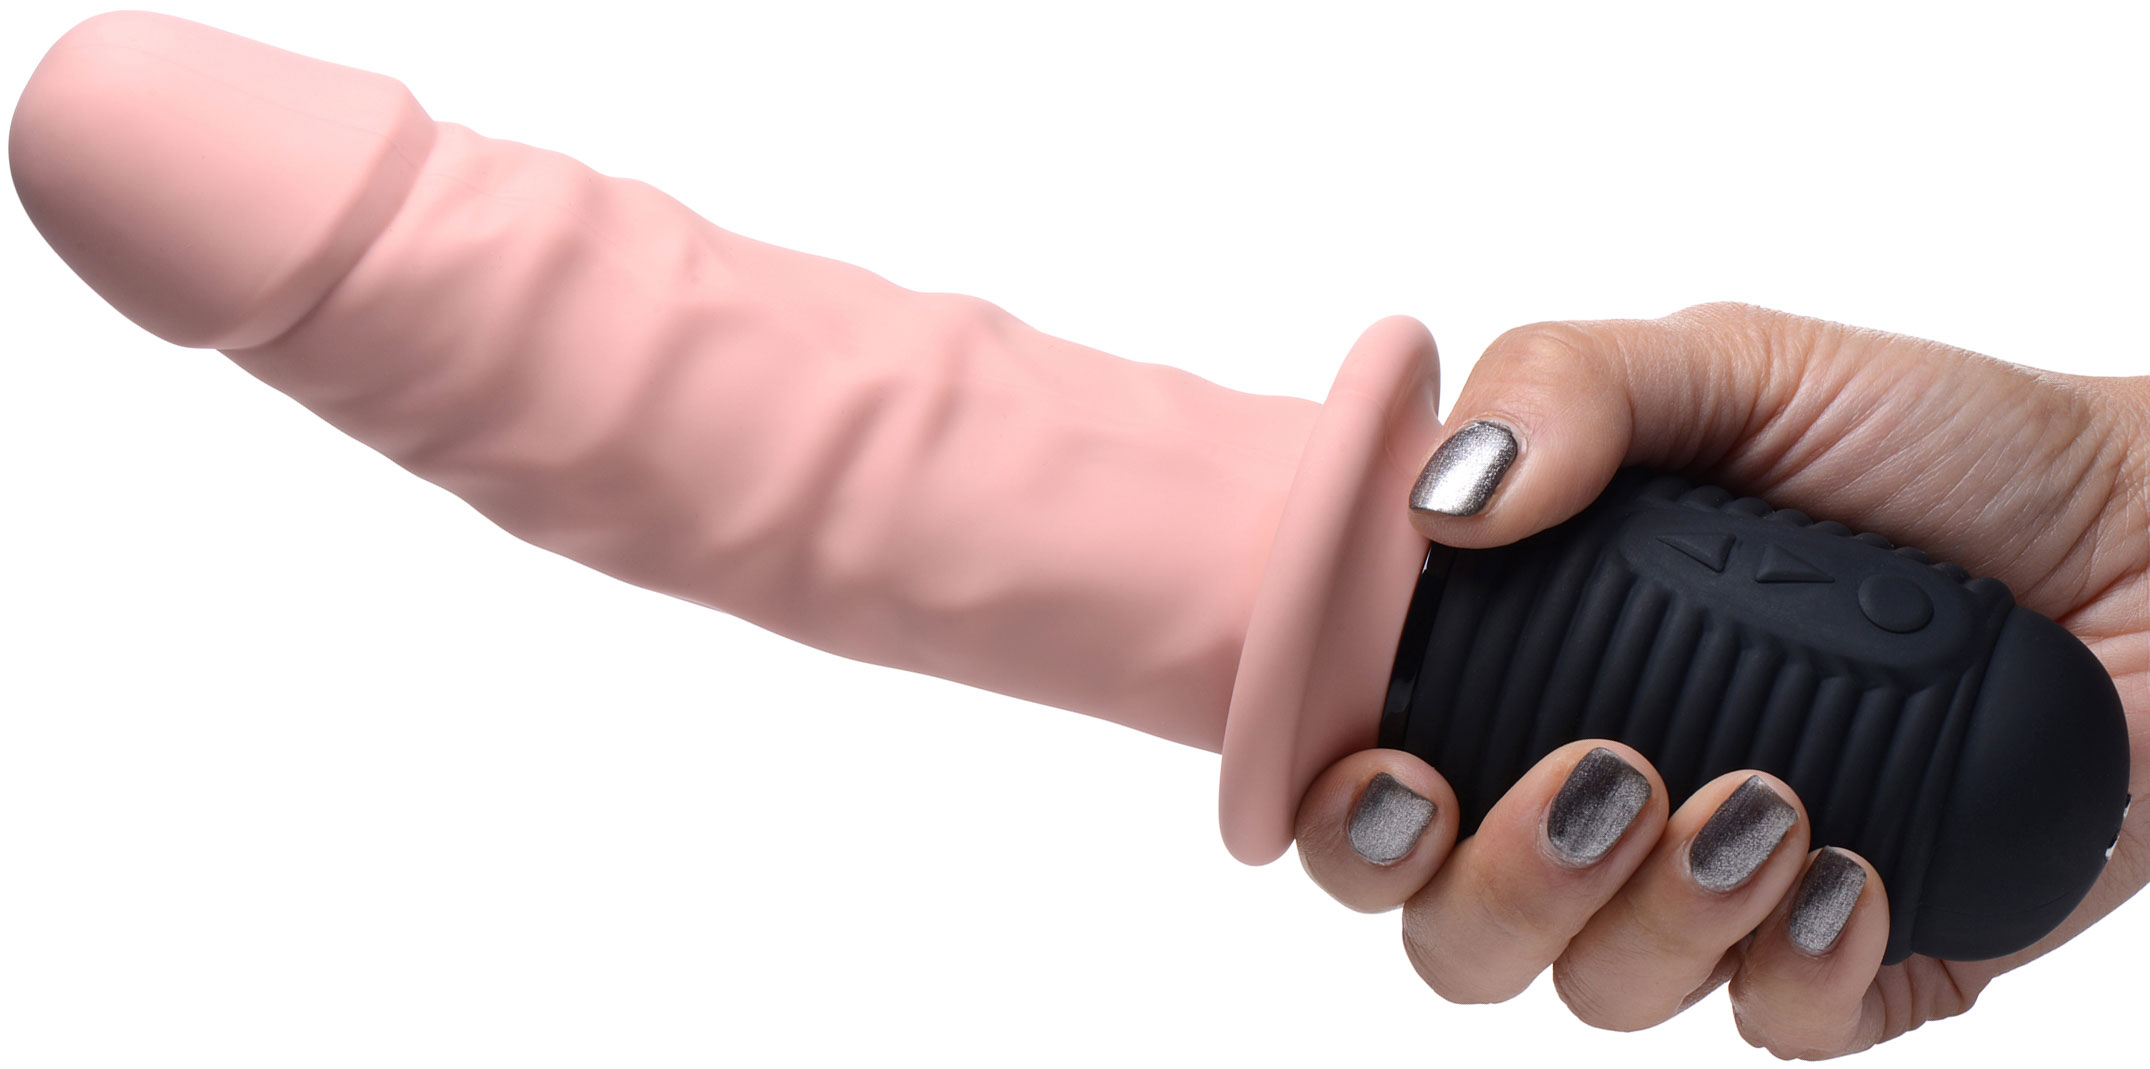 Master Series Power Pounder Vibrating & Thrusting Rechargeable Silicone Dildo With Handle In Hand